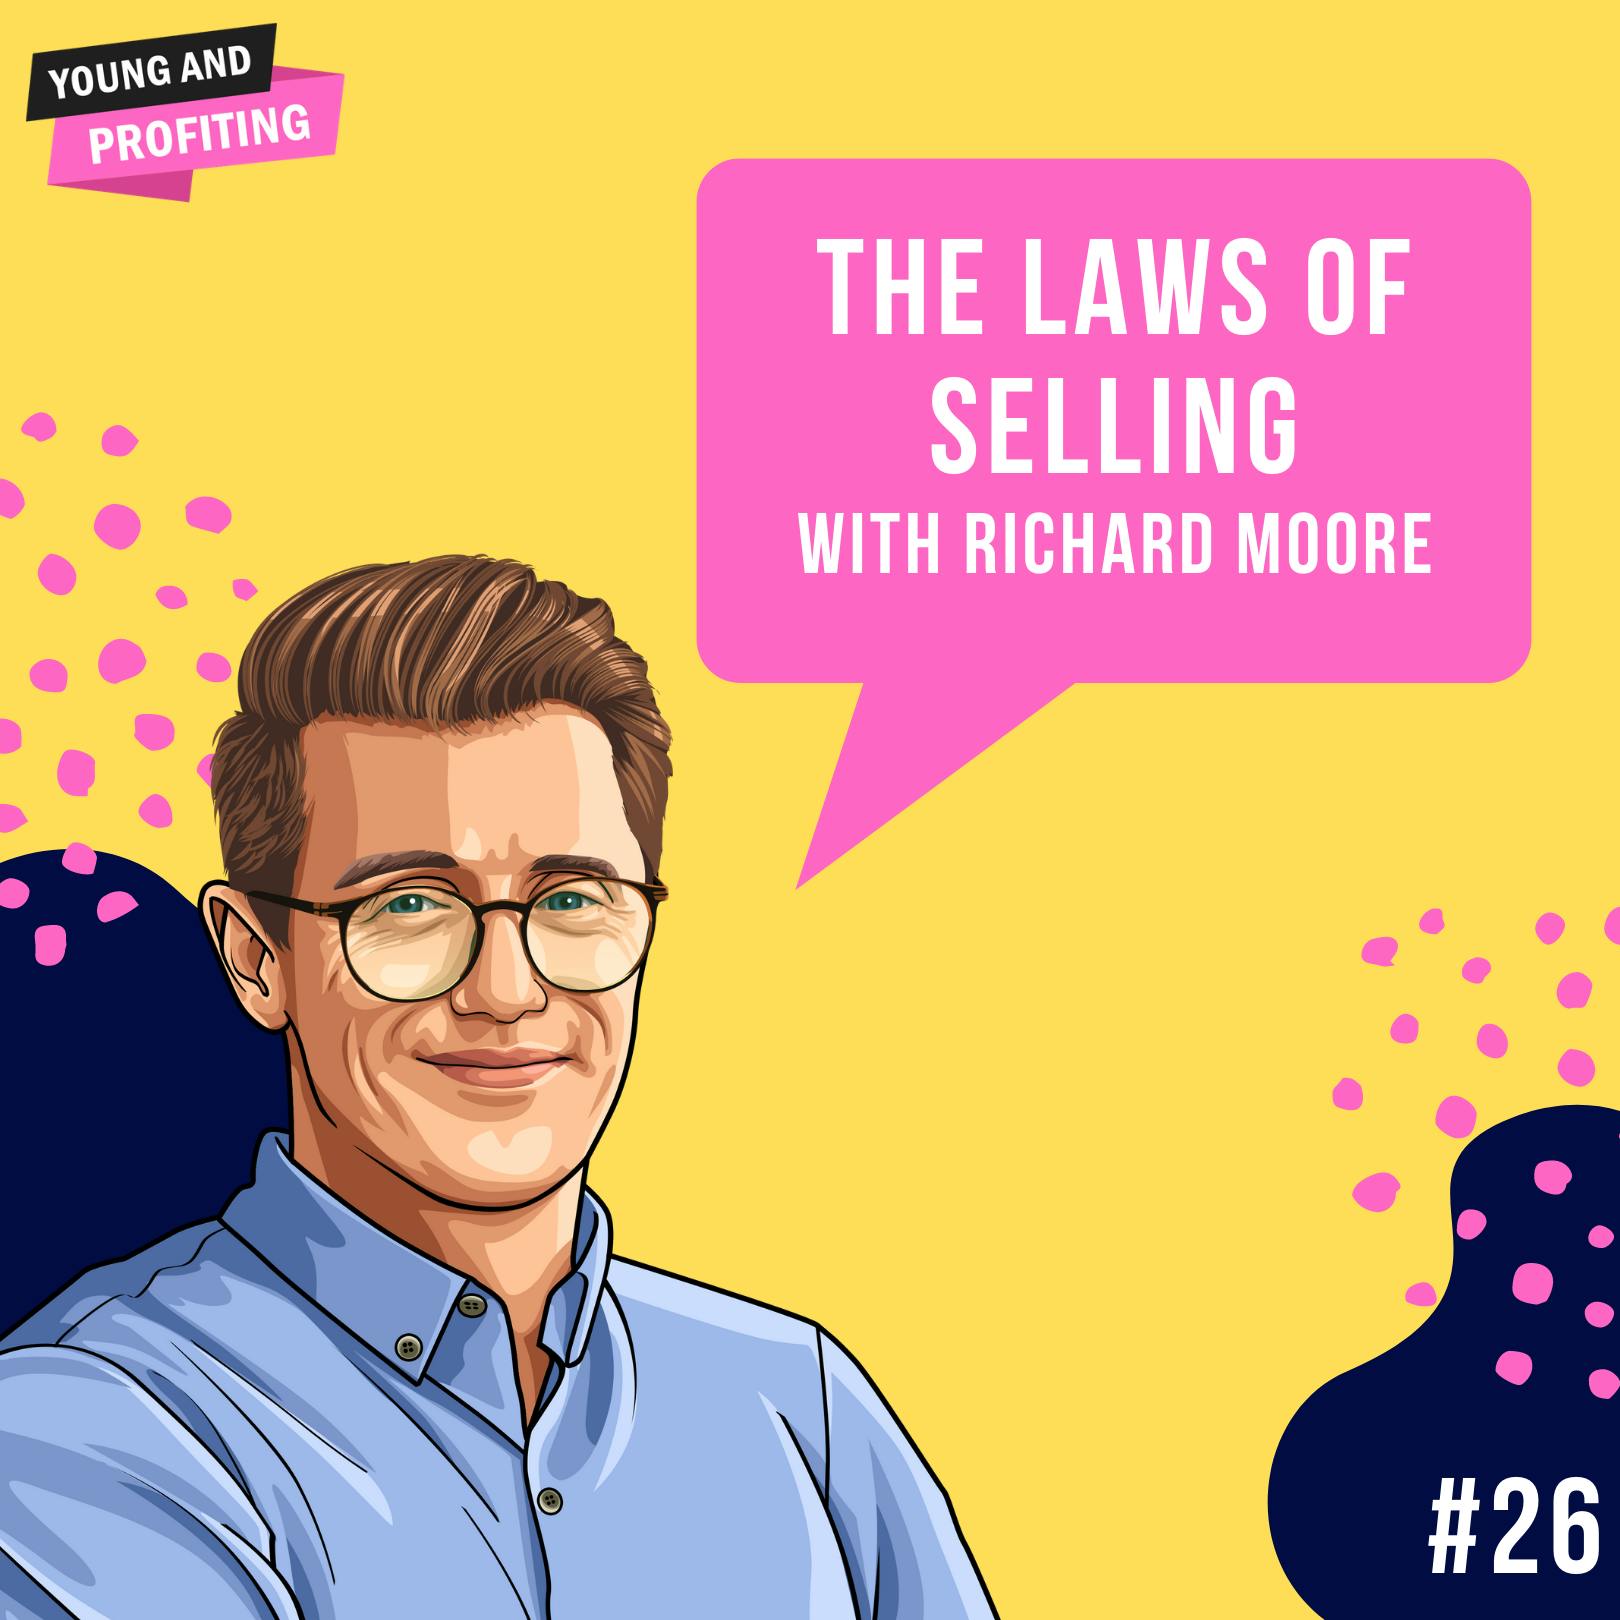 Richard Moore: The Laws of Selling | E26 by Hala Taha | YAP Media Network